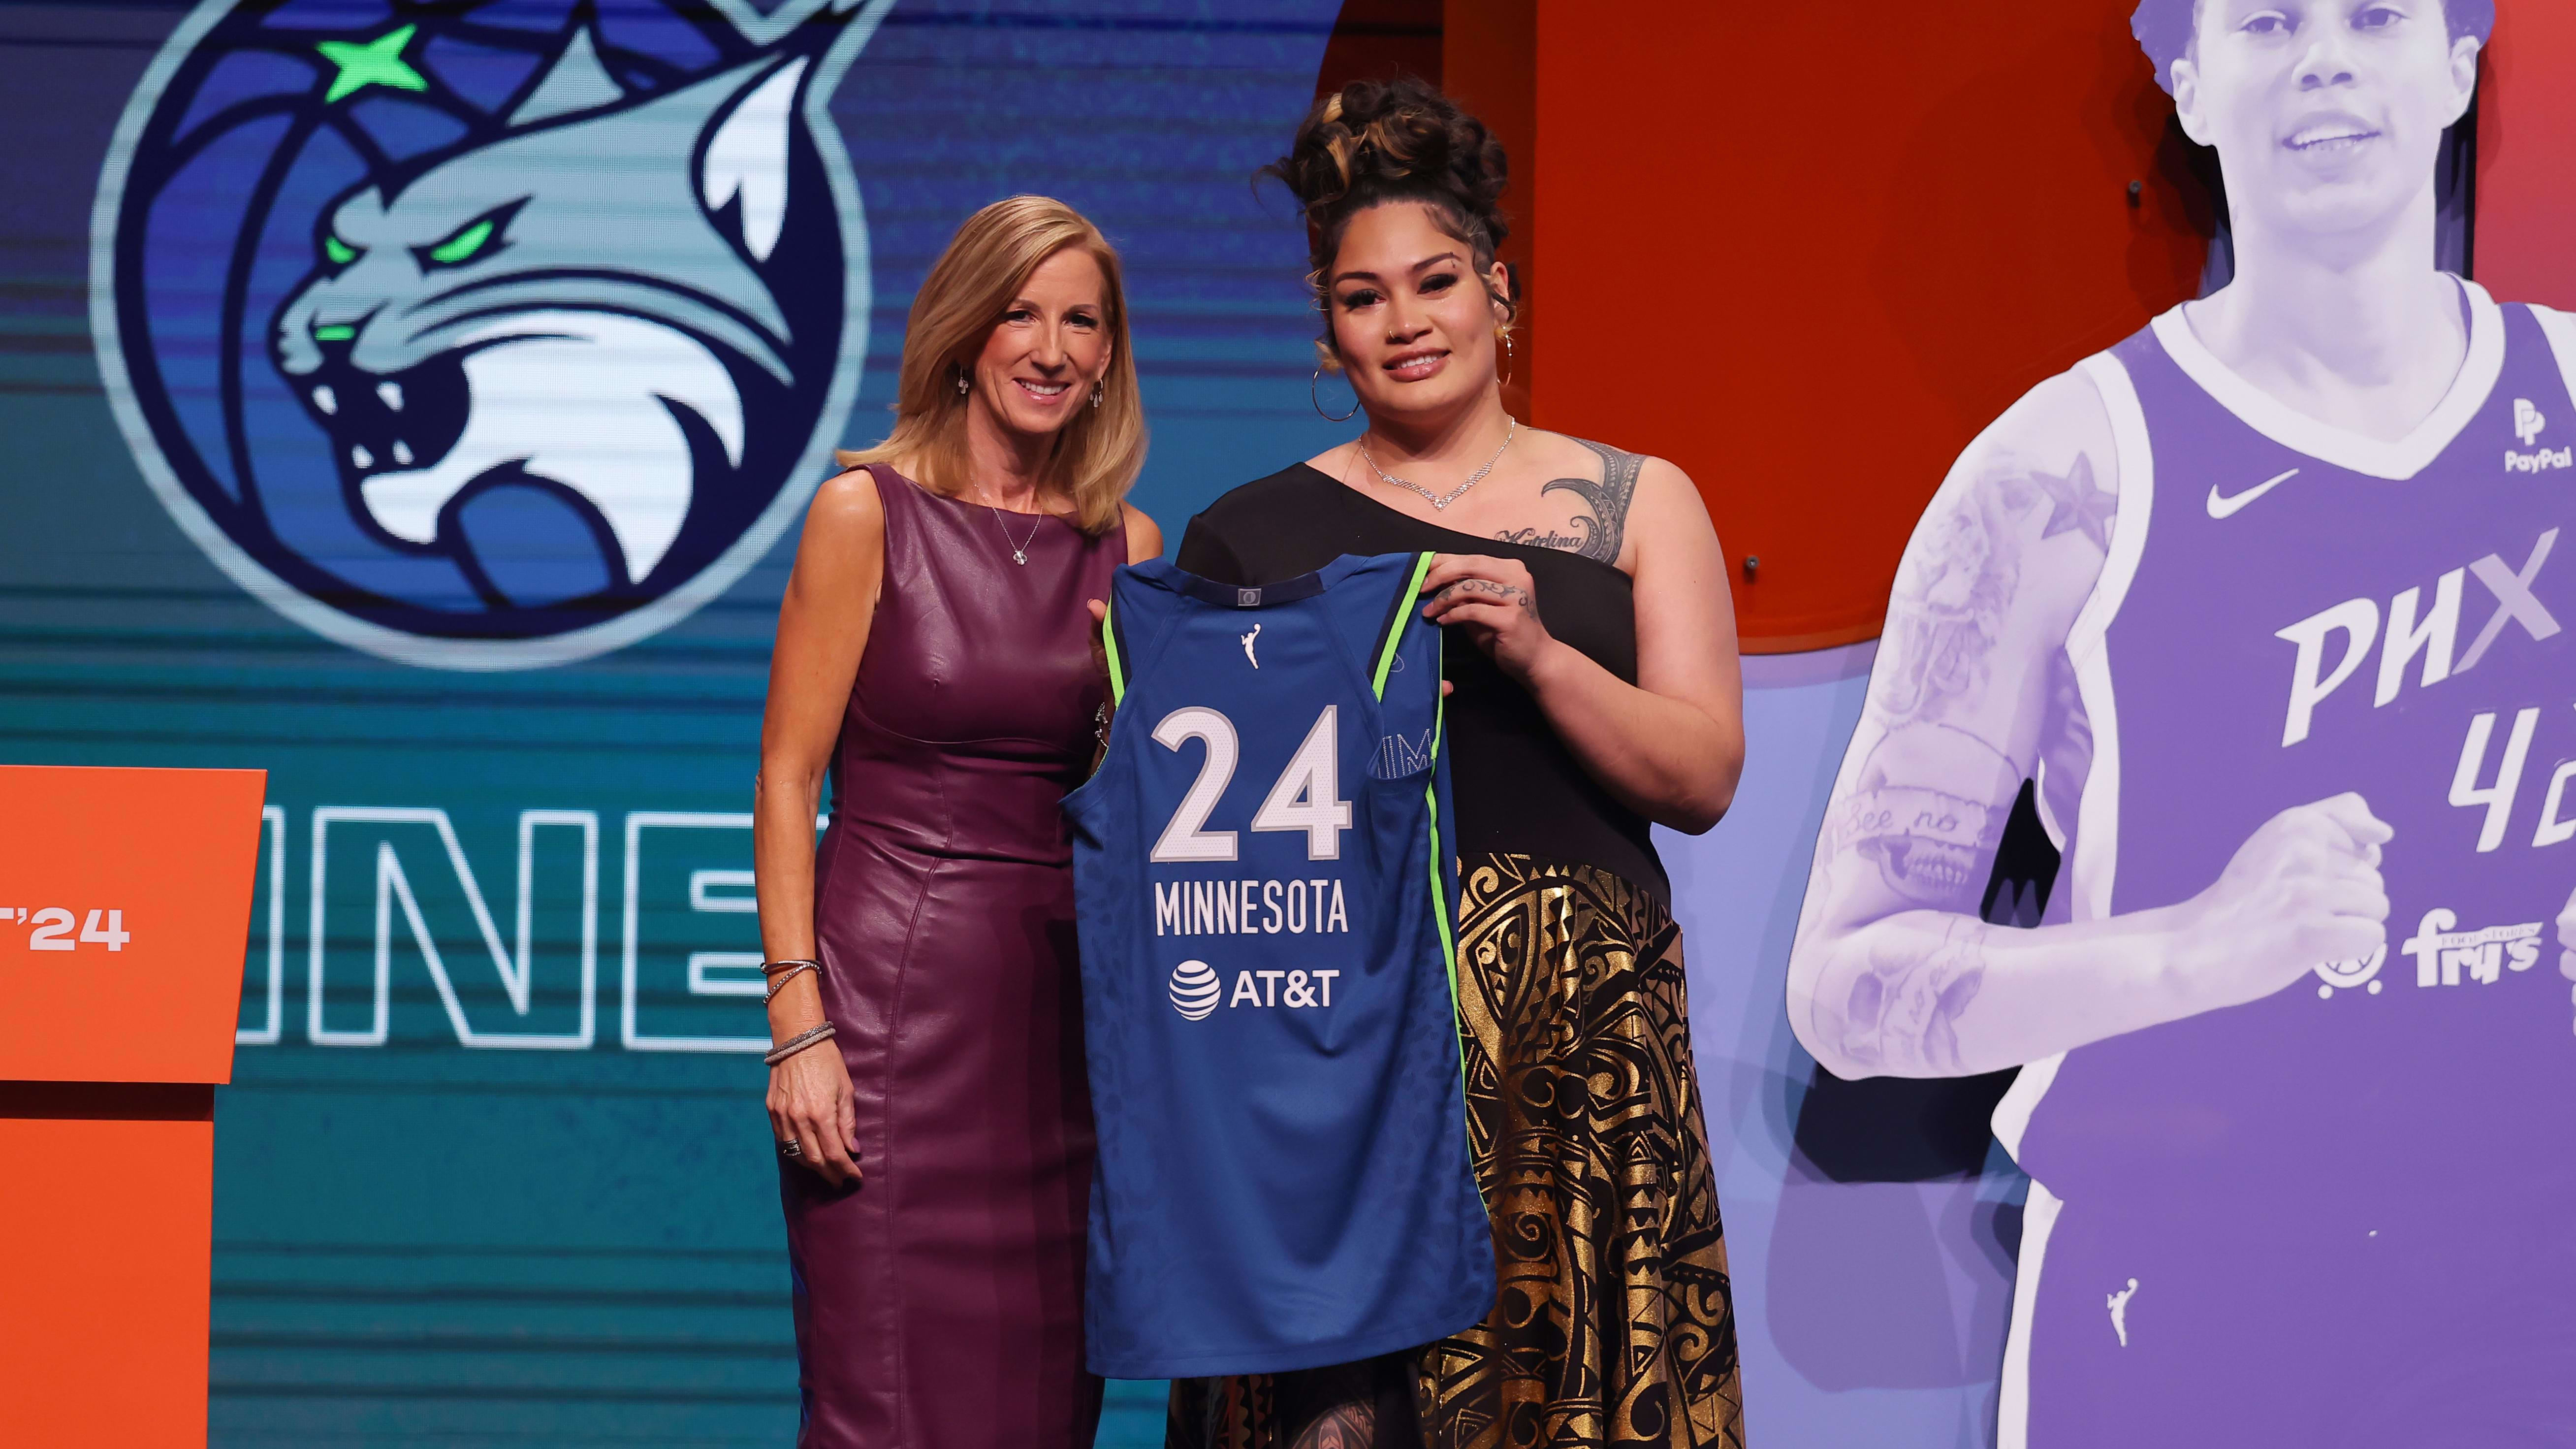 BREAKING: Utah star Alissa Pili drafted No. 8 overall by the Minnesota Lynx in WNBA draft